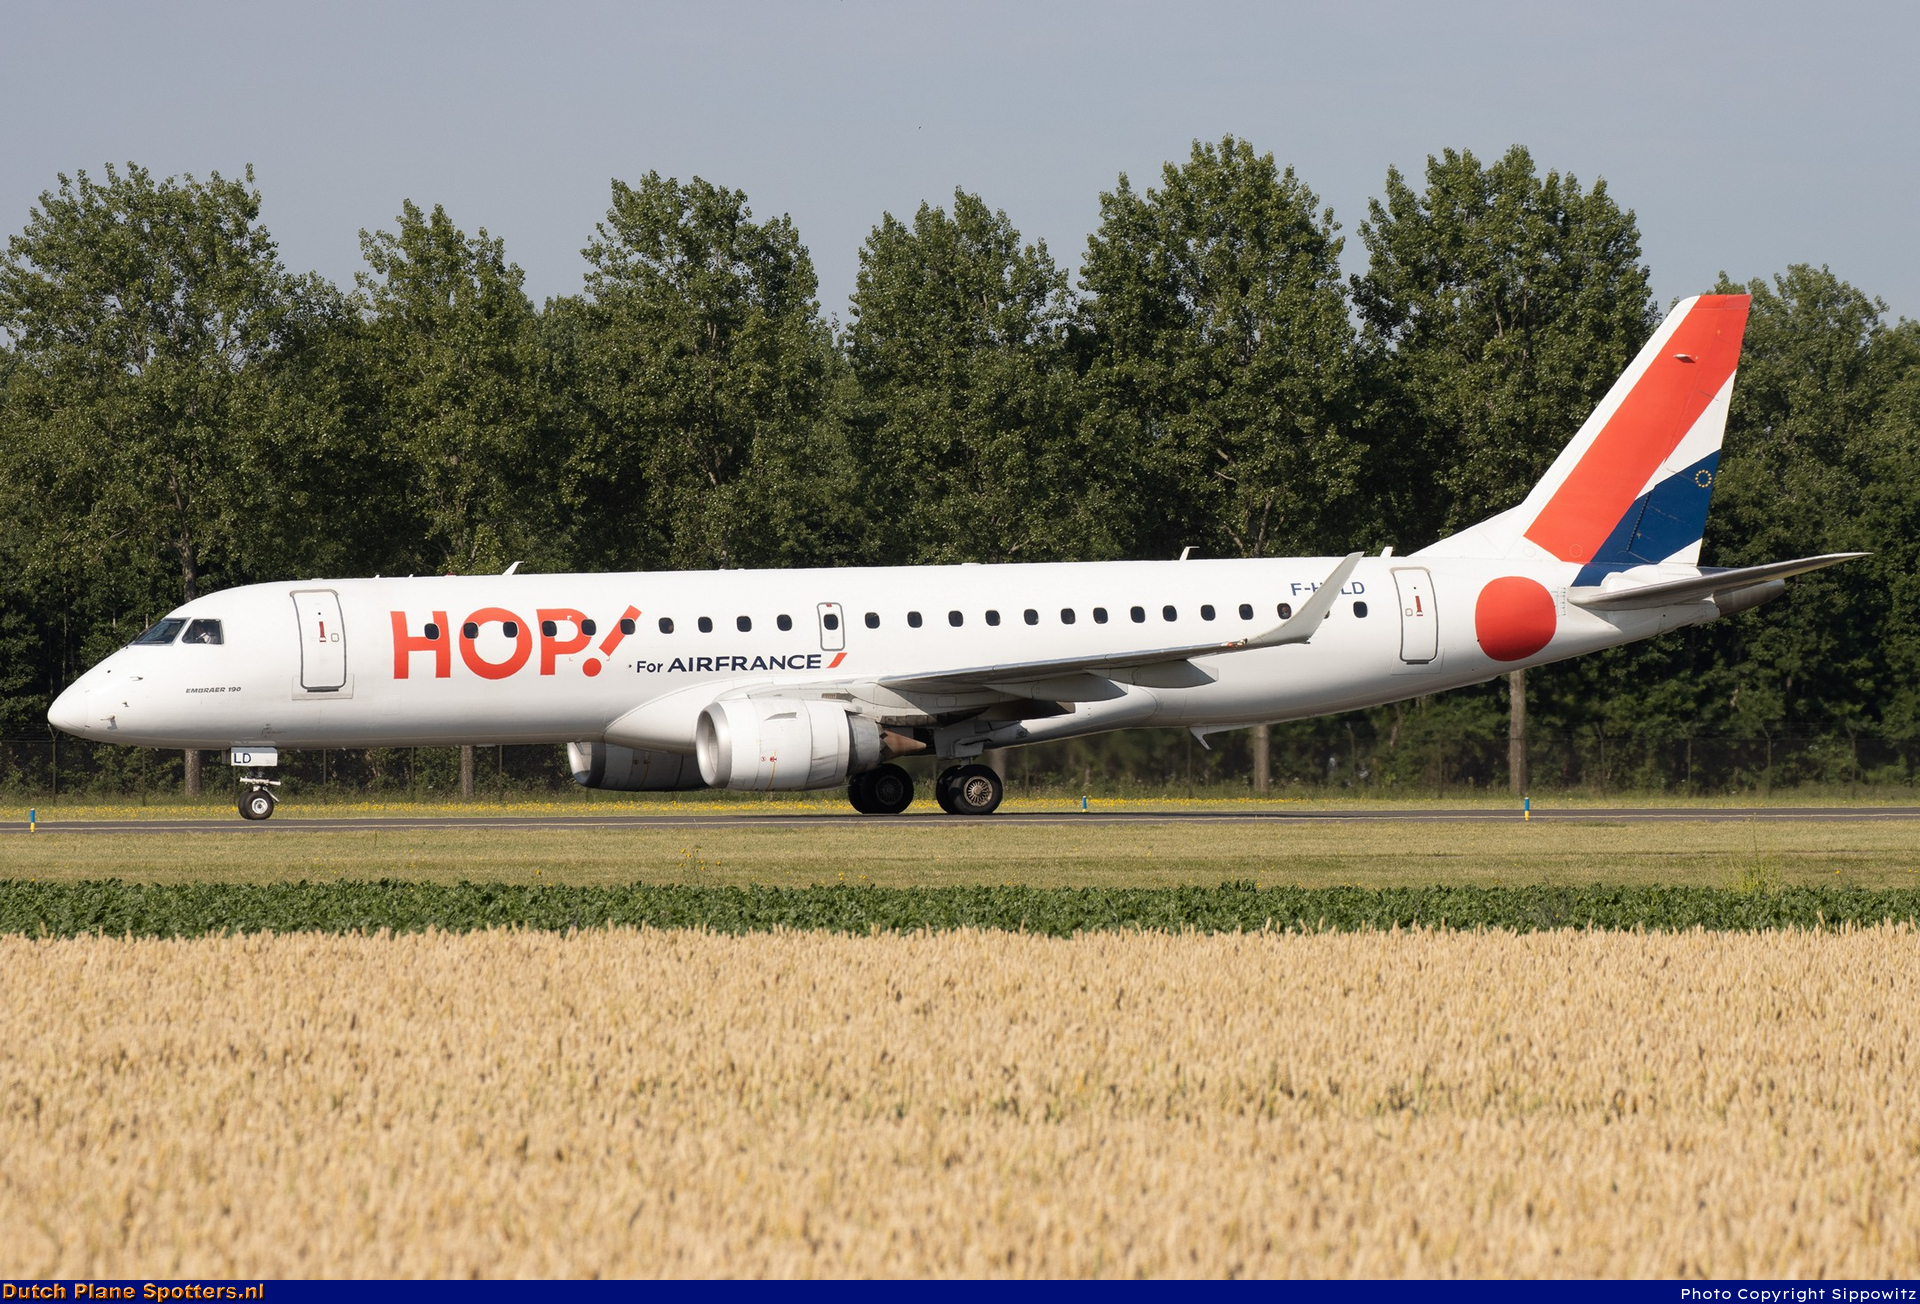 F-HBLD Embraer 190 Hop (Air France) by Sippowitz